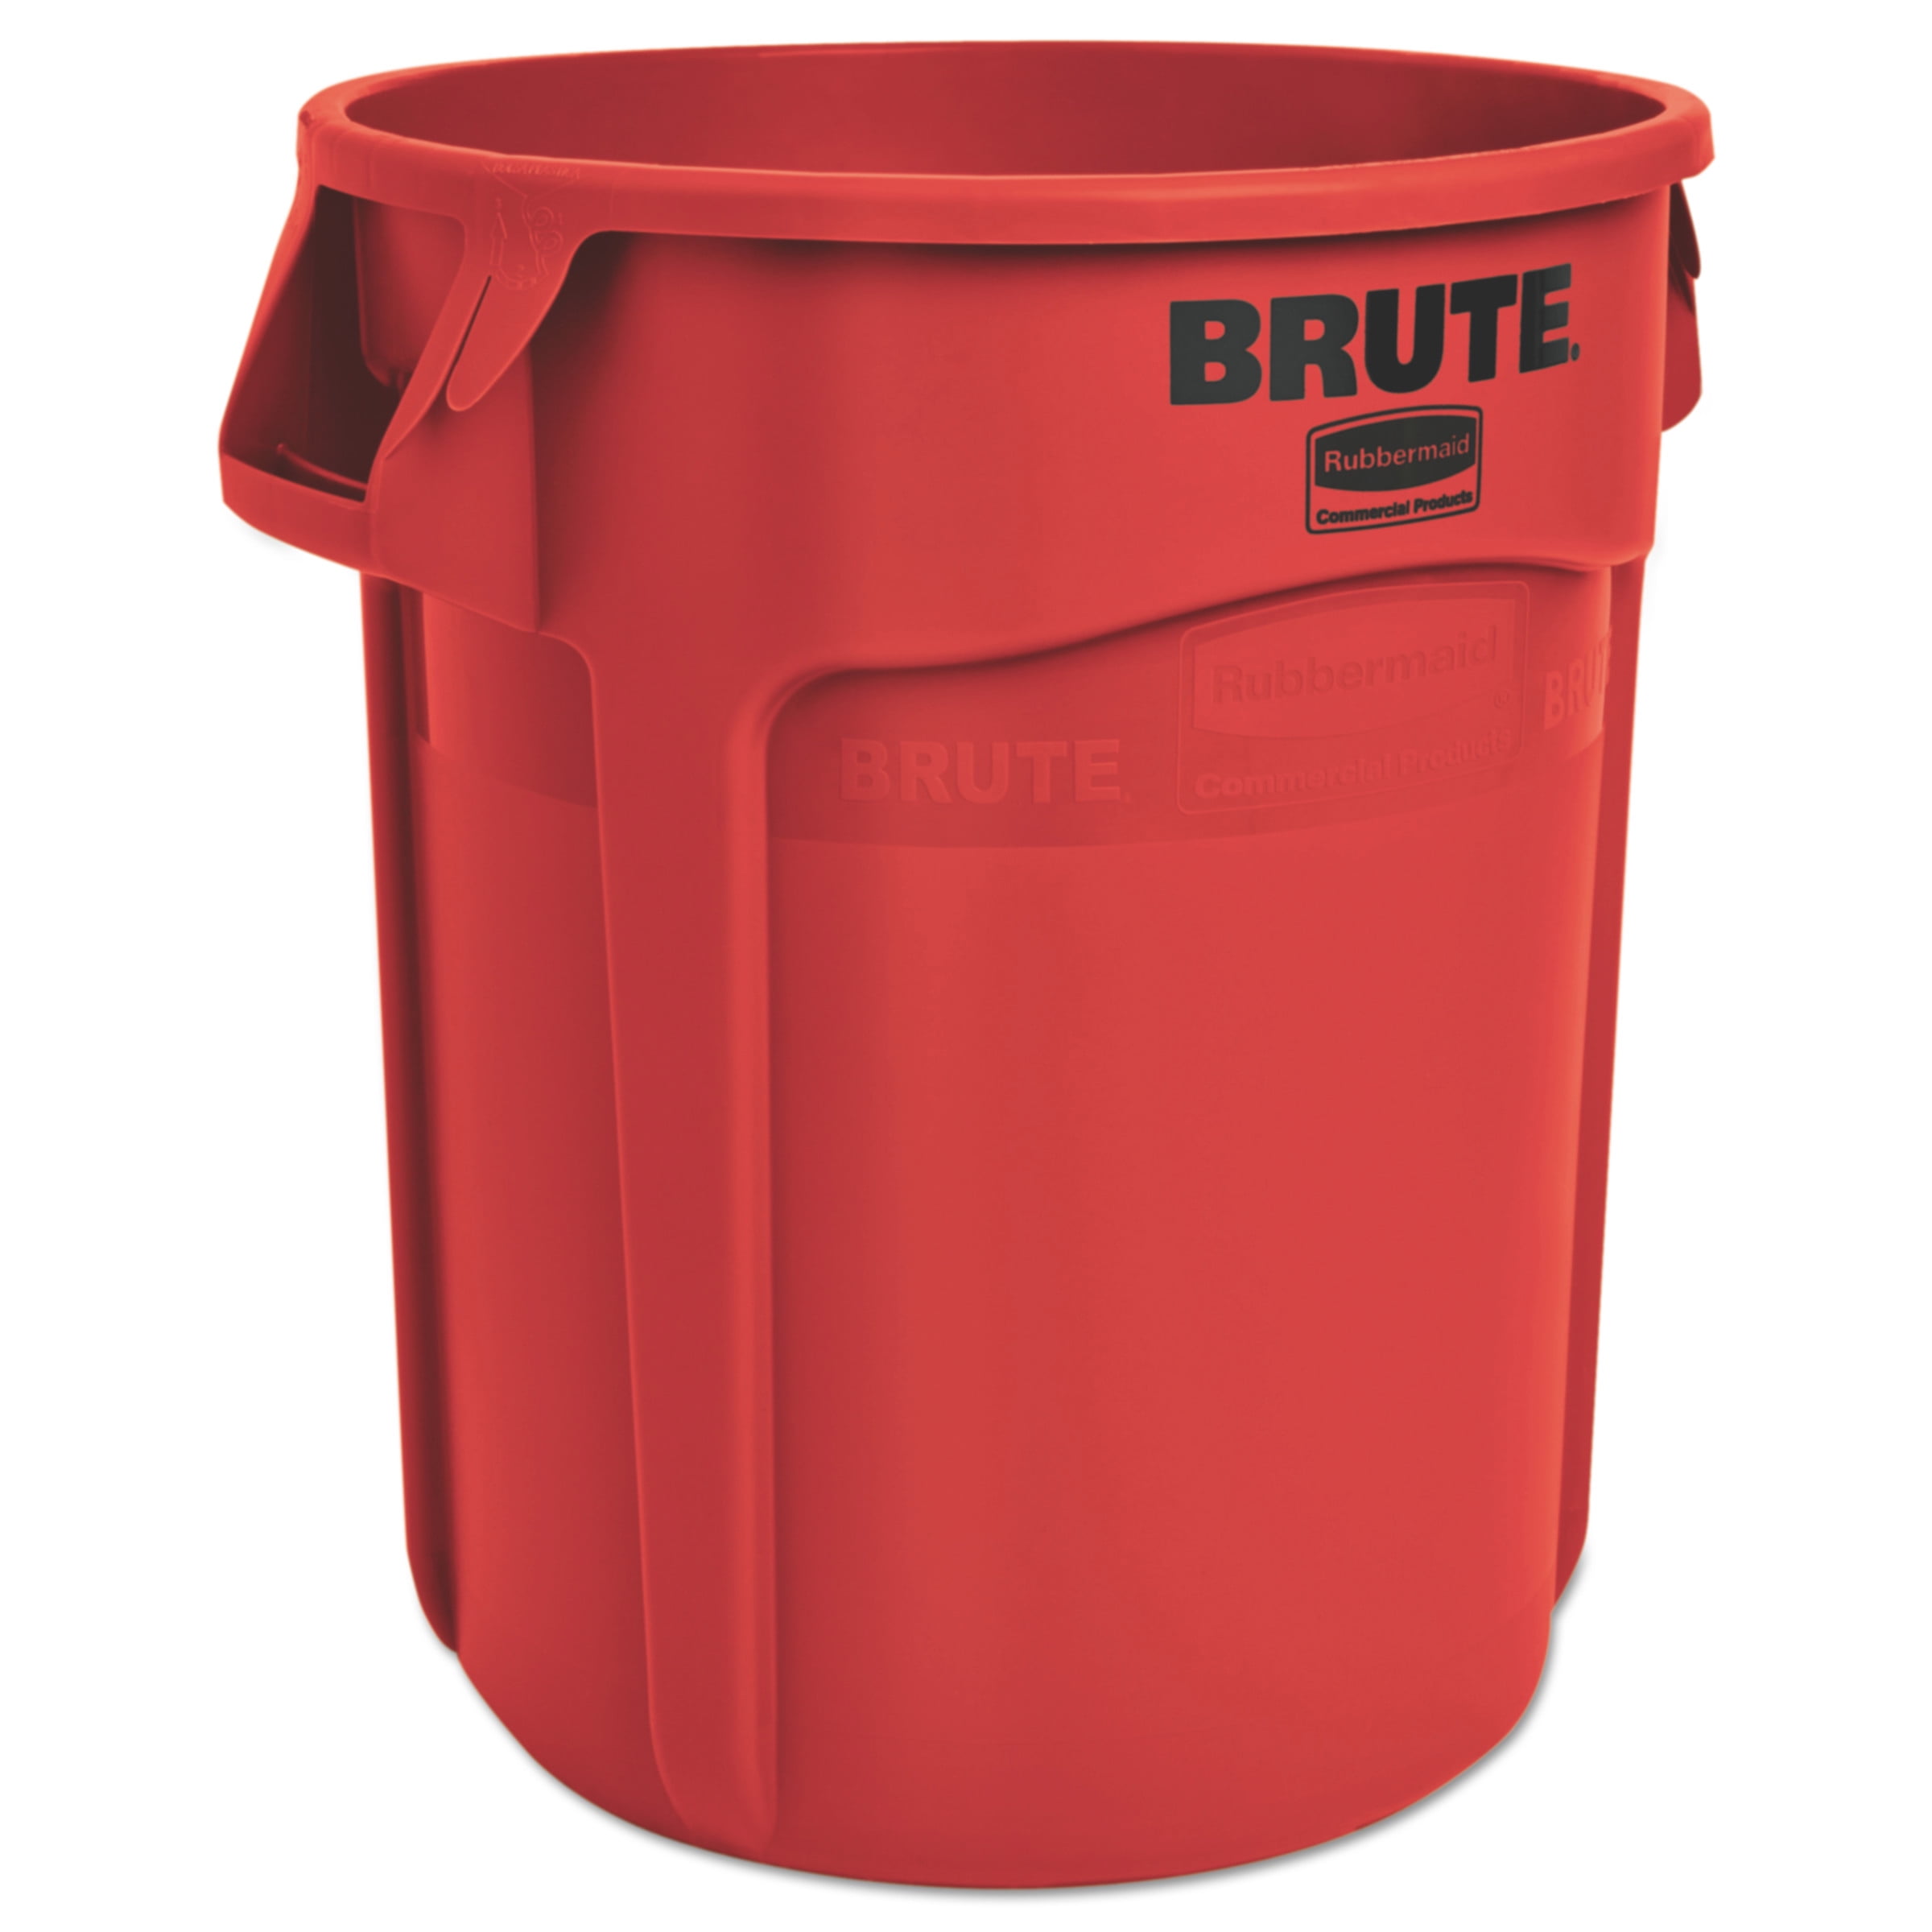 Rubbermaid Commercial Plastic Round Brute Containers, 10 